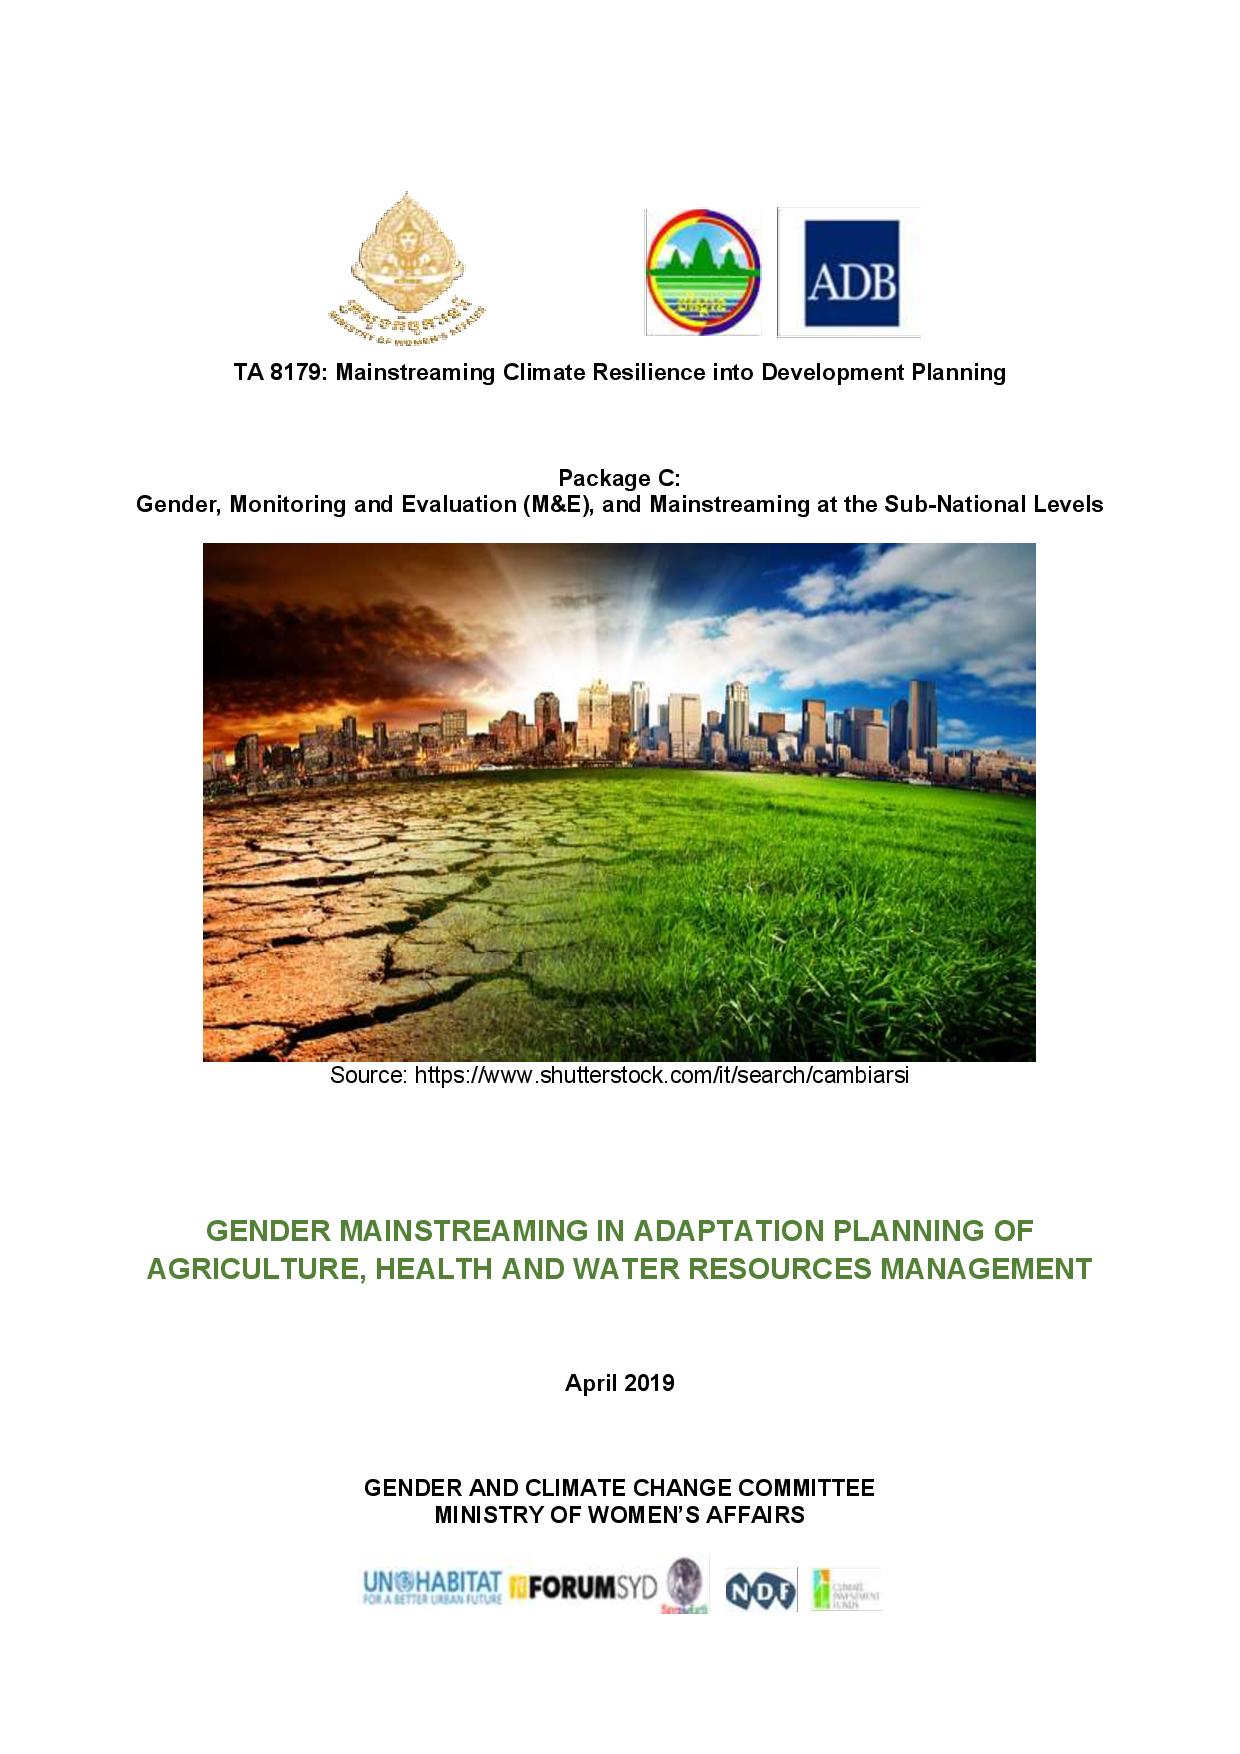 Gender Mainstreaming in Adaptation Planning of Agriculture, Health and Water Resources Management